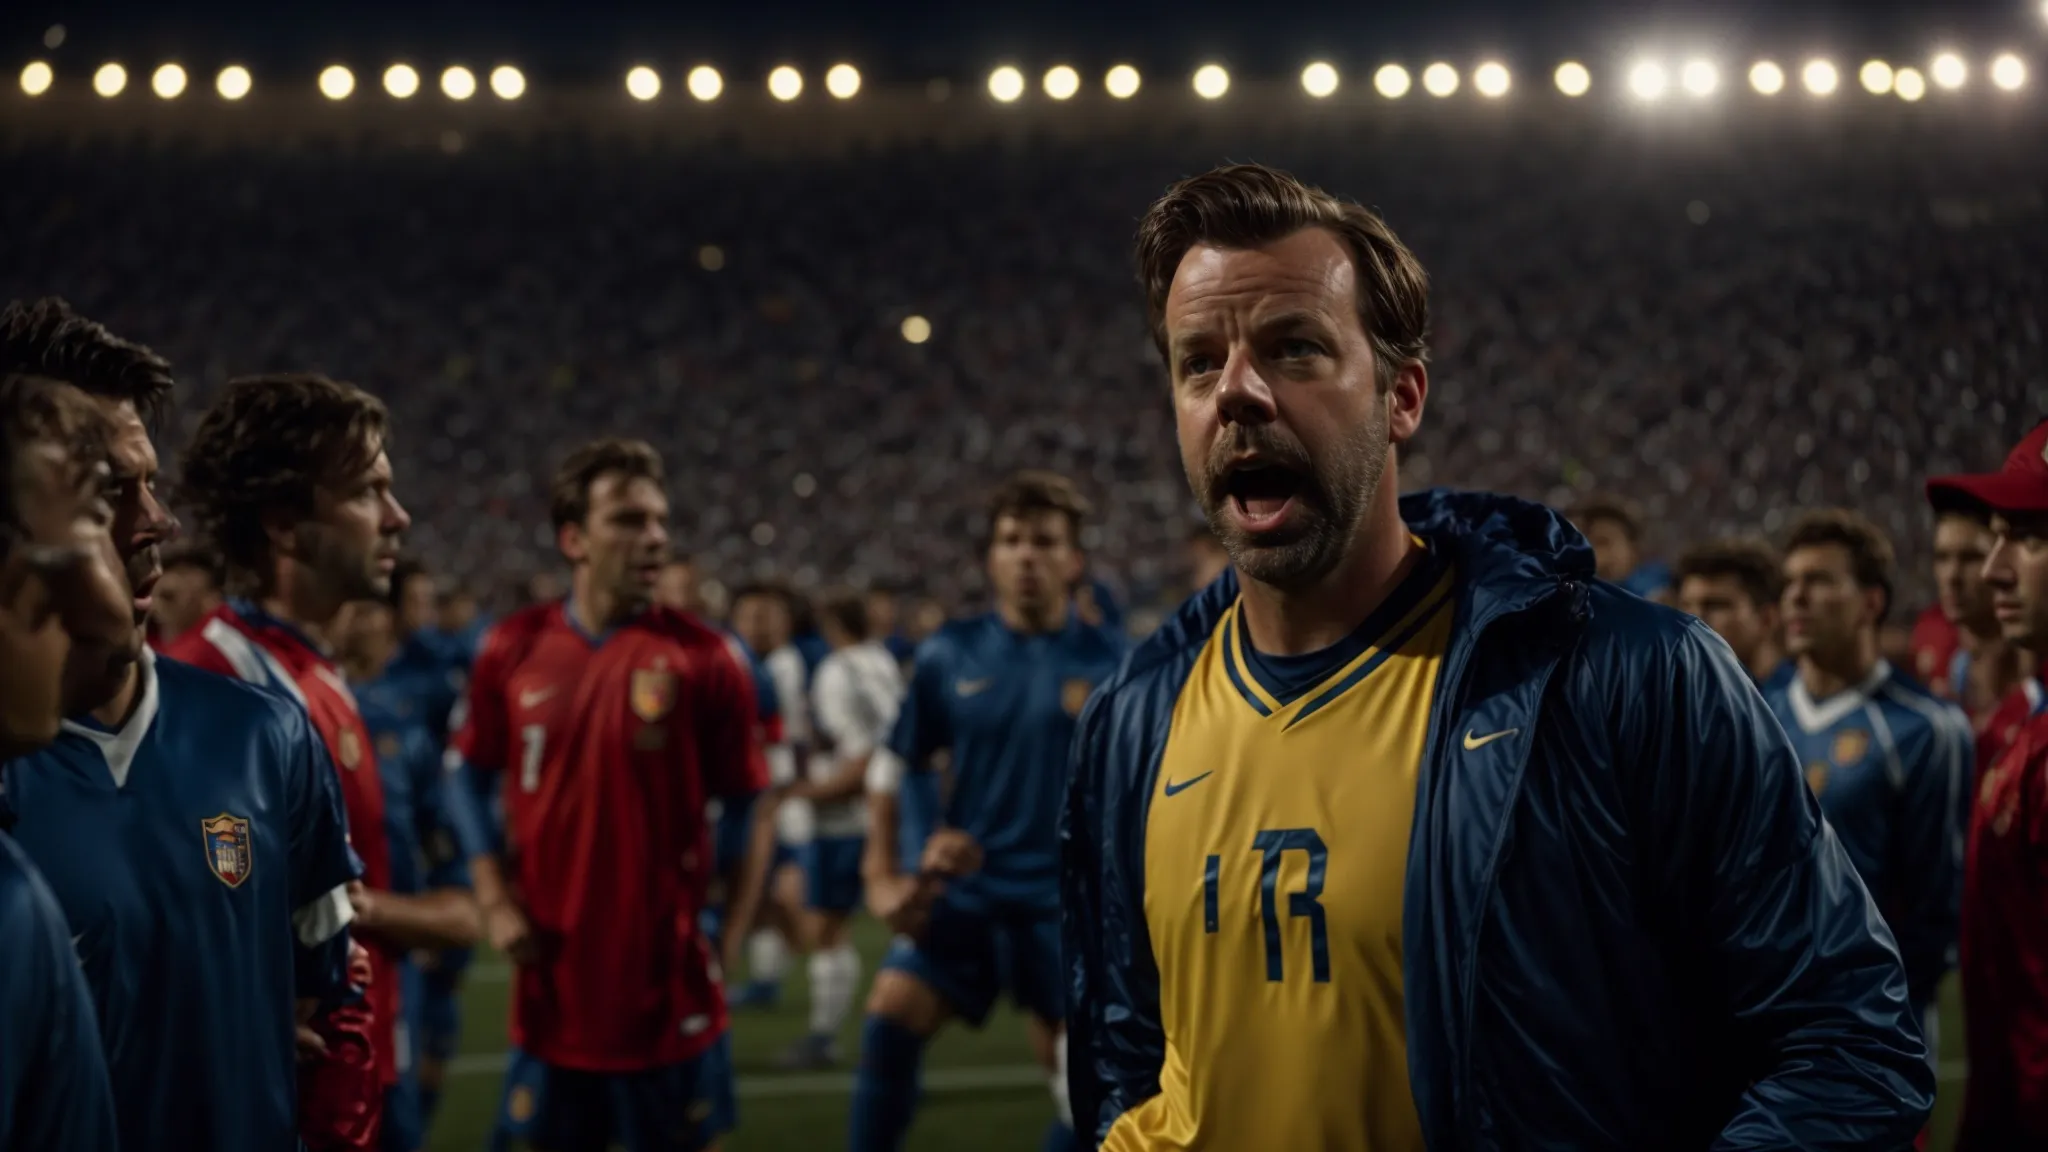 jason sudeikis, as ted lasso, delivers an enthusiastic pep talk to his soccer team on the field under bright stadium lights.